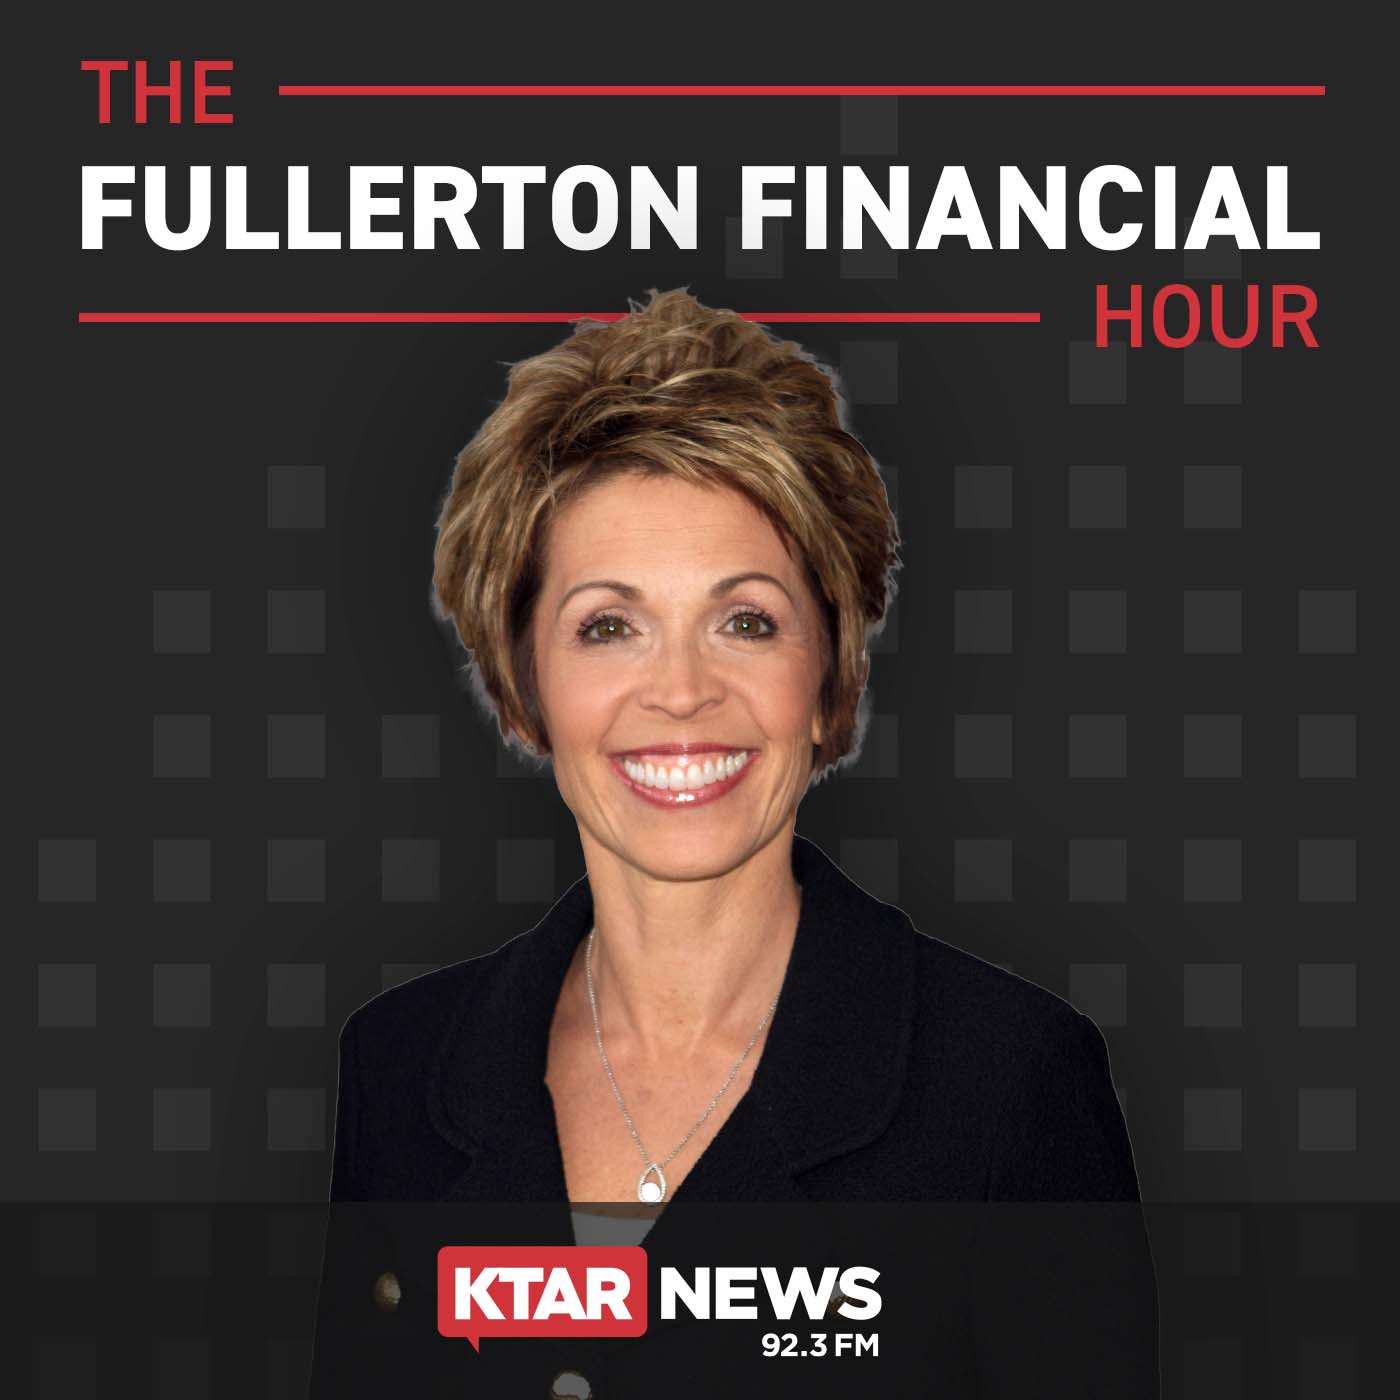 The Fullerton Financial Hour